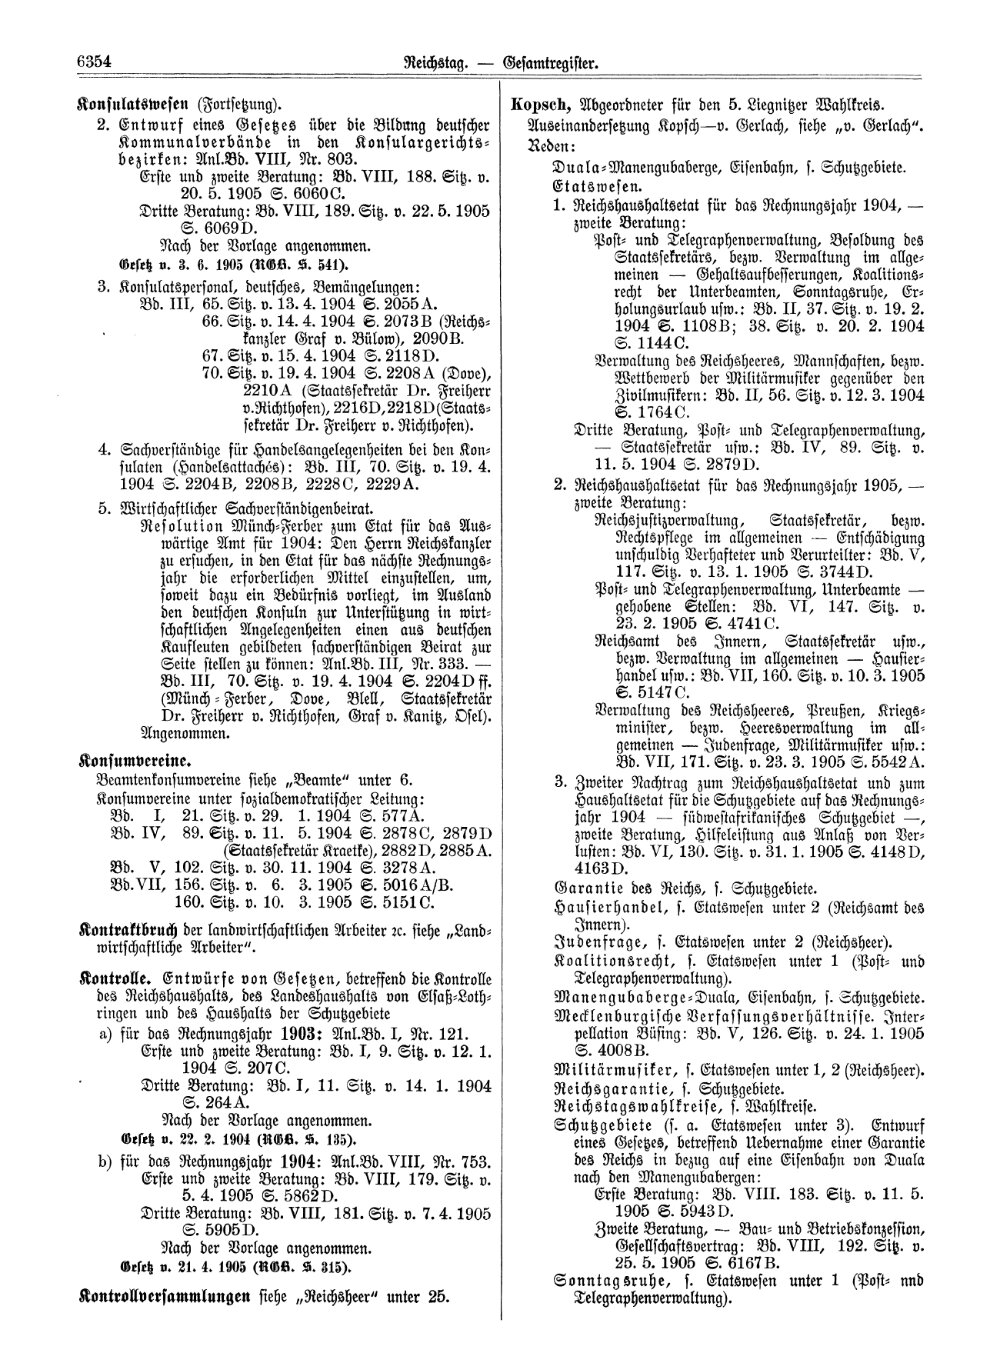 Scan of page 6354